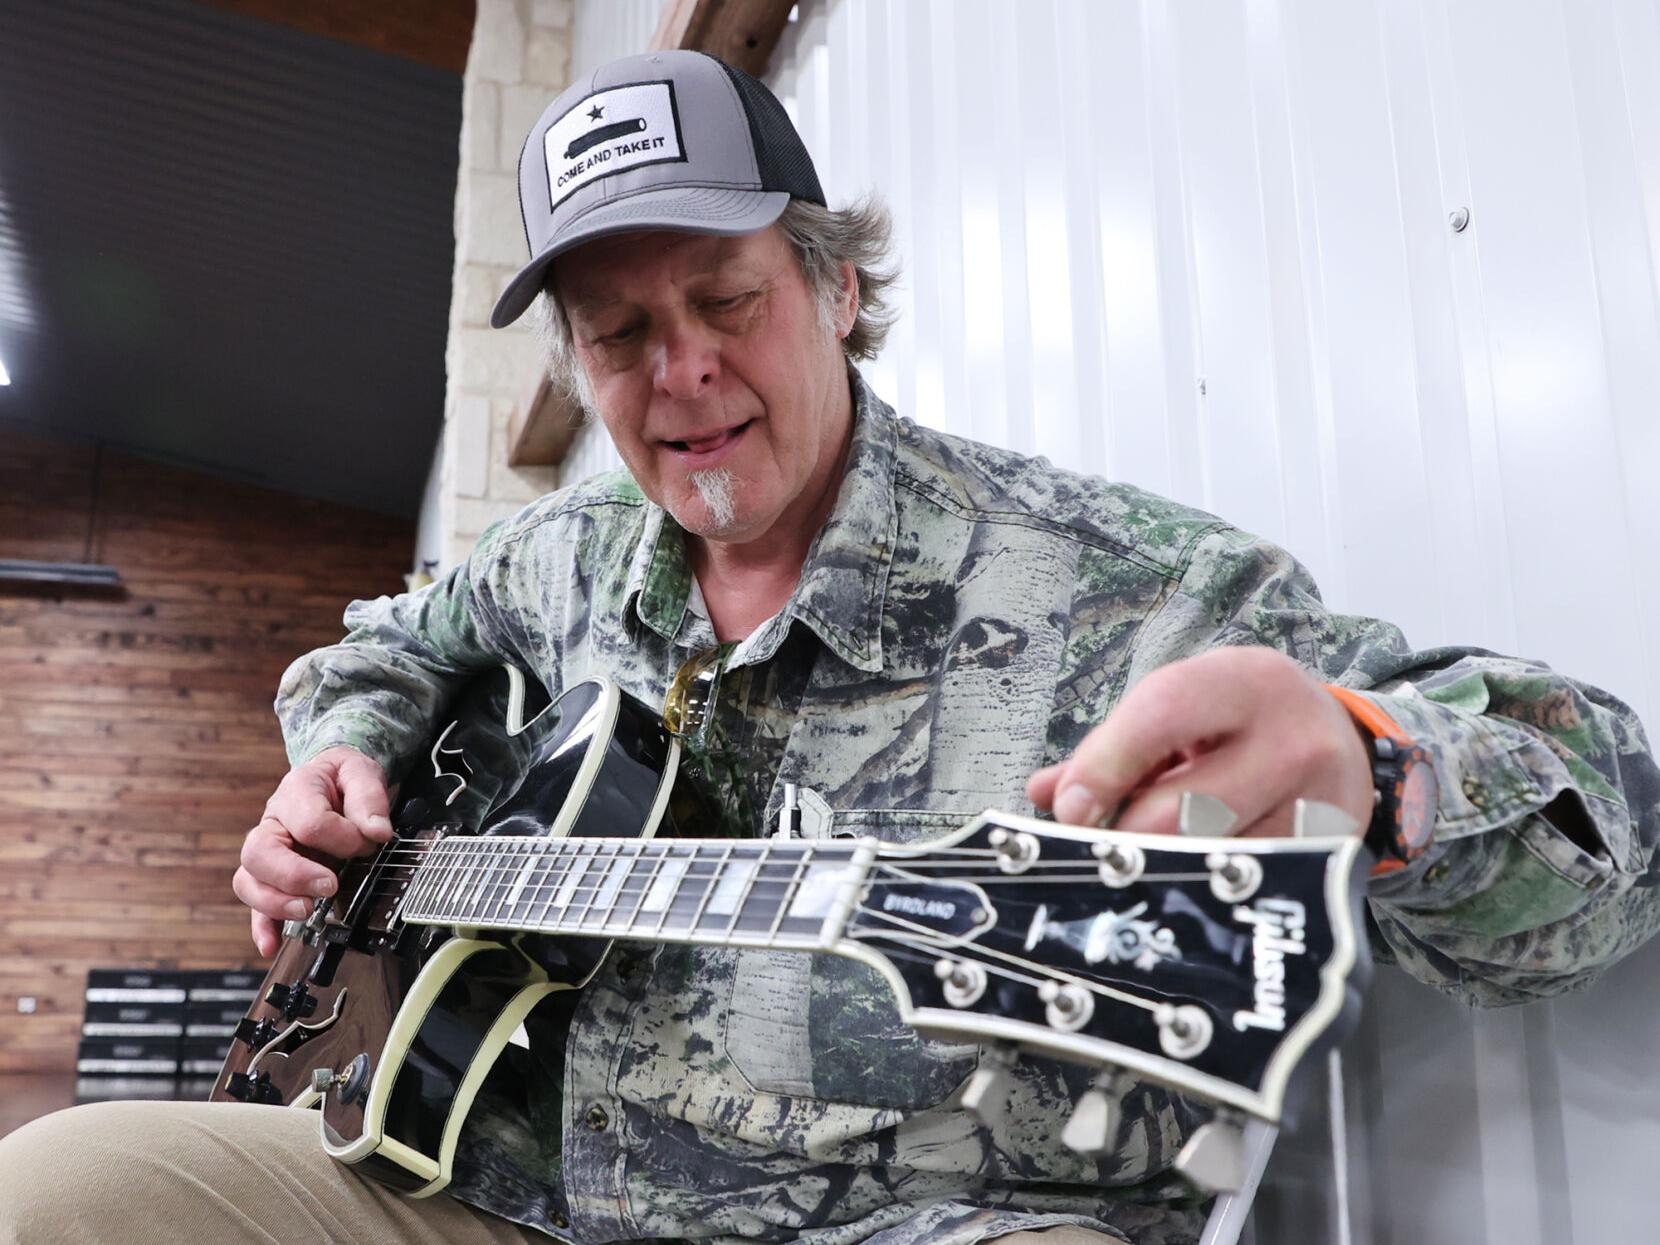 Approaching Ted Nugent auction near Waco is characteristically Nuge | Local  News | wacotrib.com